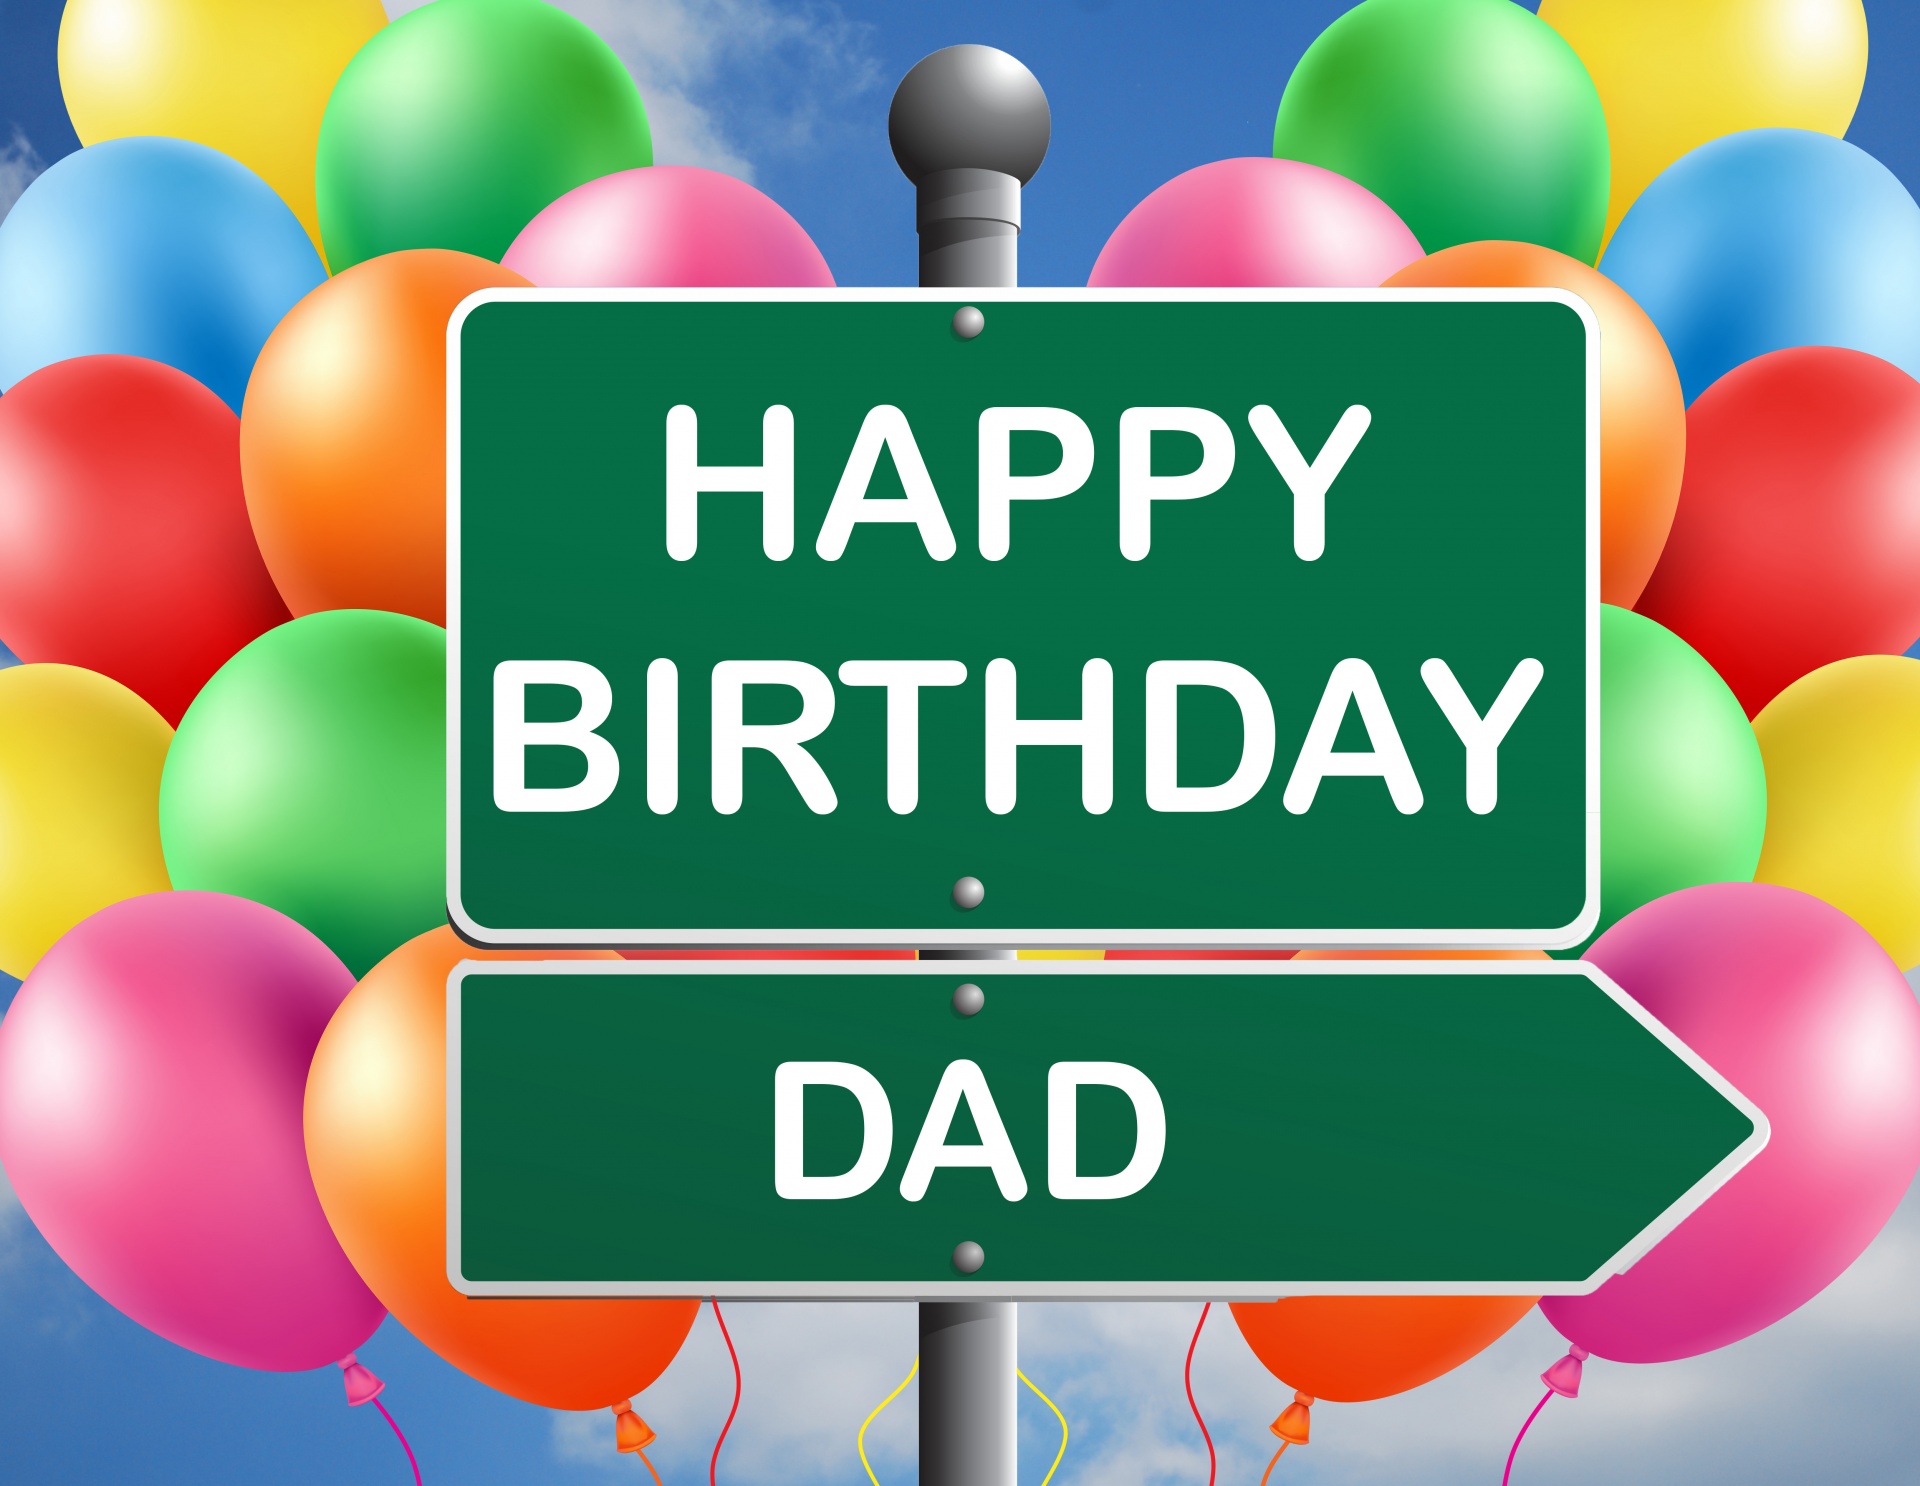 Short and Sweet Birthday Wishes For Father: quotes, poems and sms